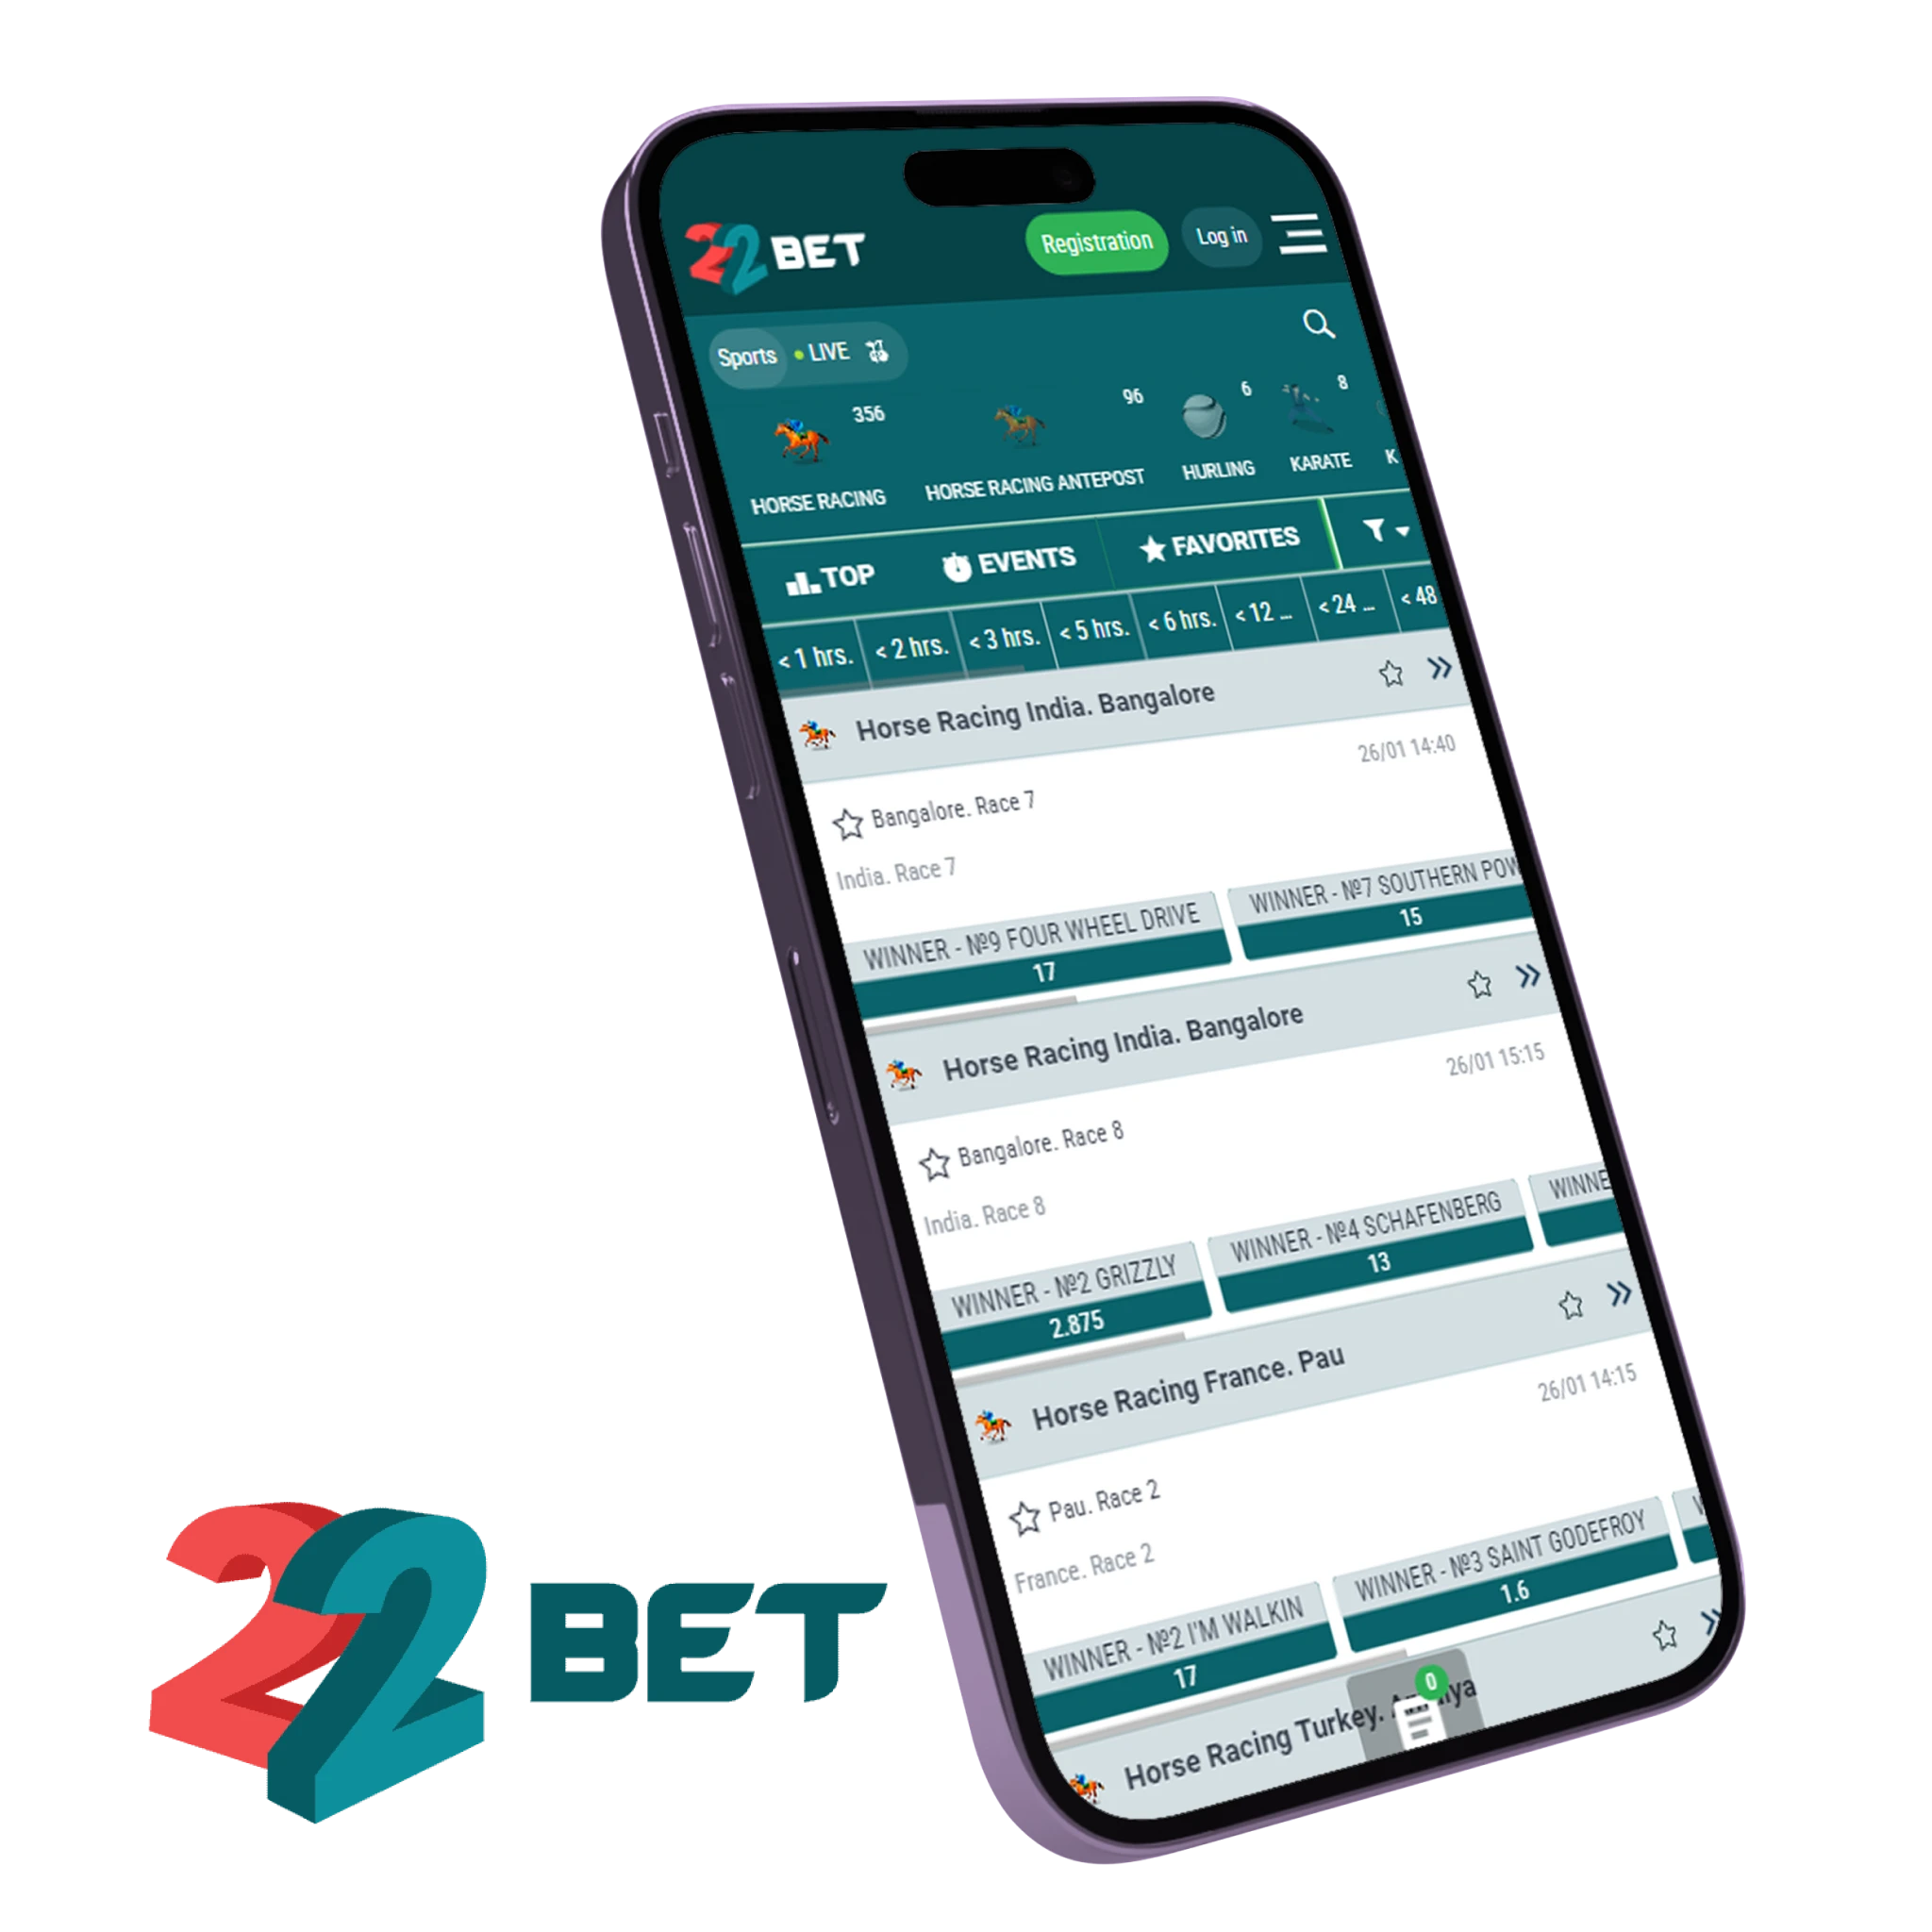 22bet has all the horse racing odds to bet on.